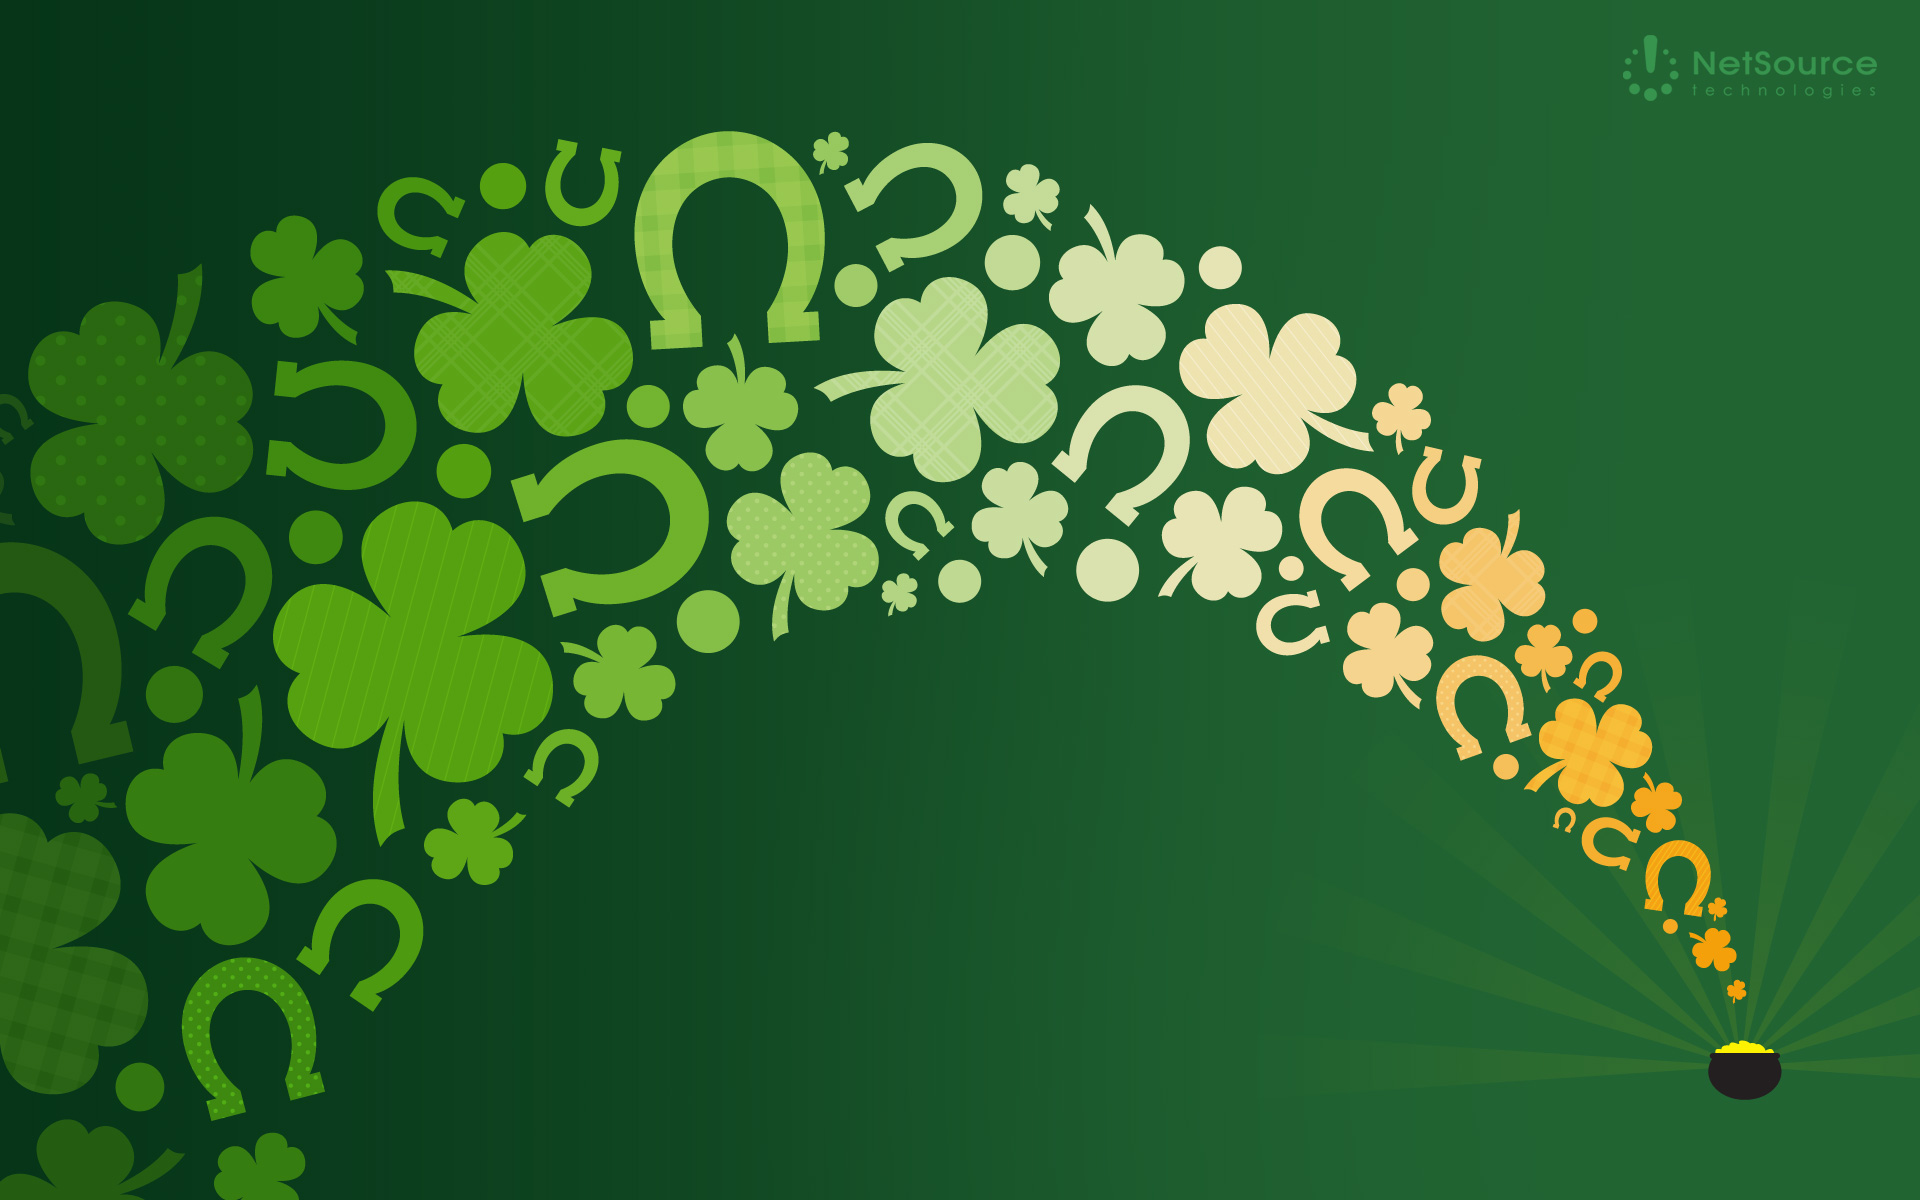 st patricks day wallpaper is all about the wallpapers which you gonna